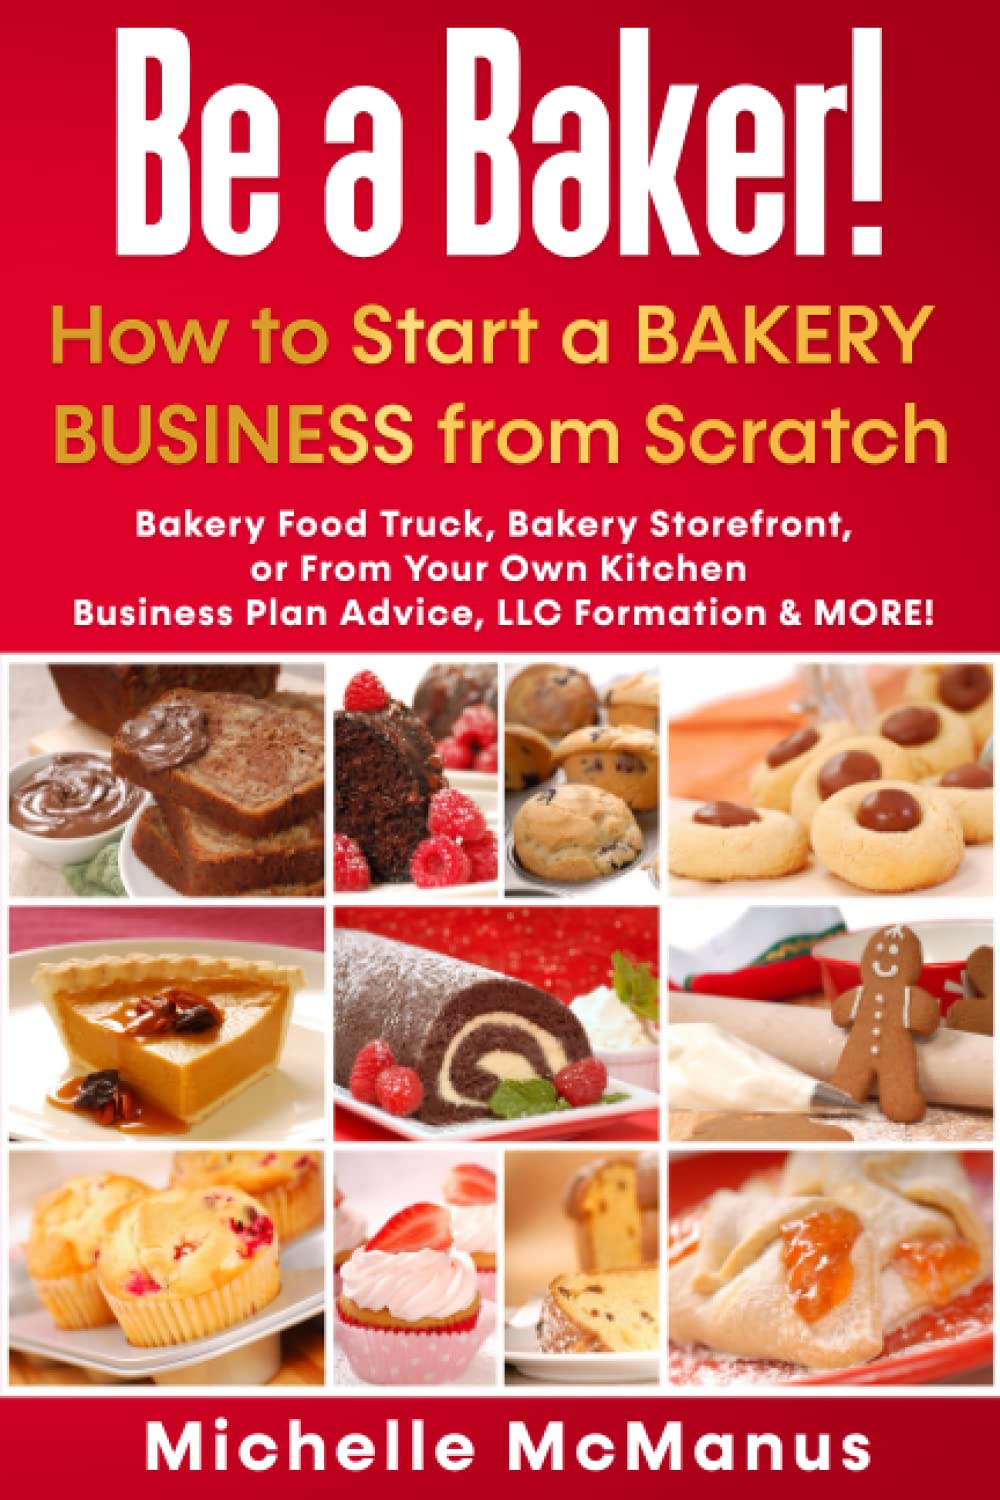 Be a Baker! How to Start a Bakery Business from Scratch: Bakery Food Truck, Bakery Storefront, or From Your Own Kitchen – Business Plan Advice, LLC Formation & MORE!